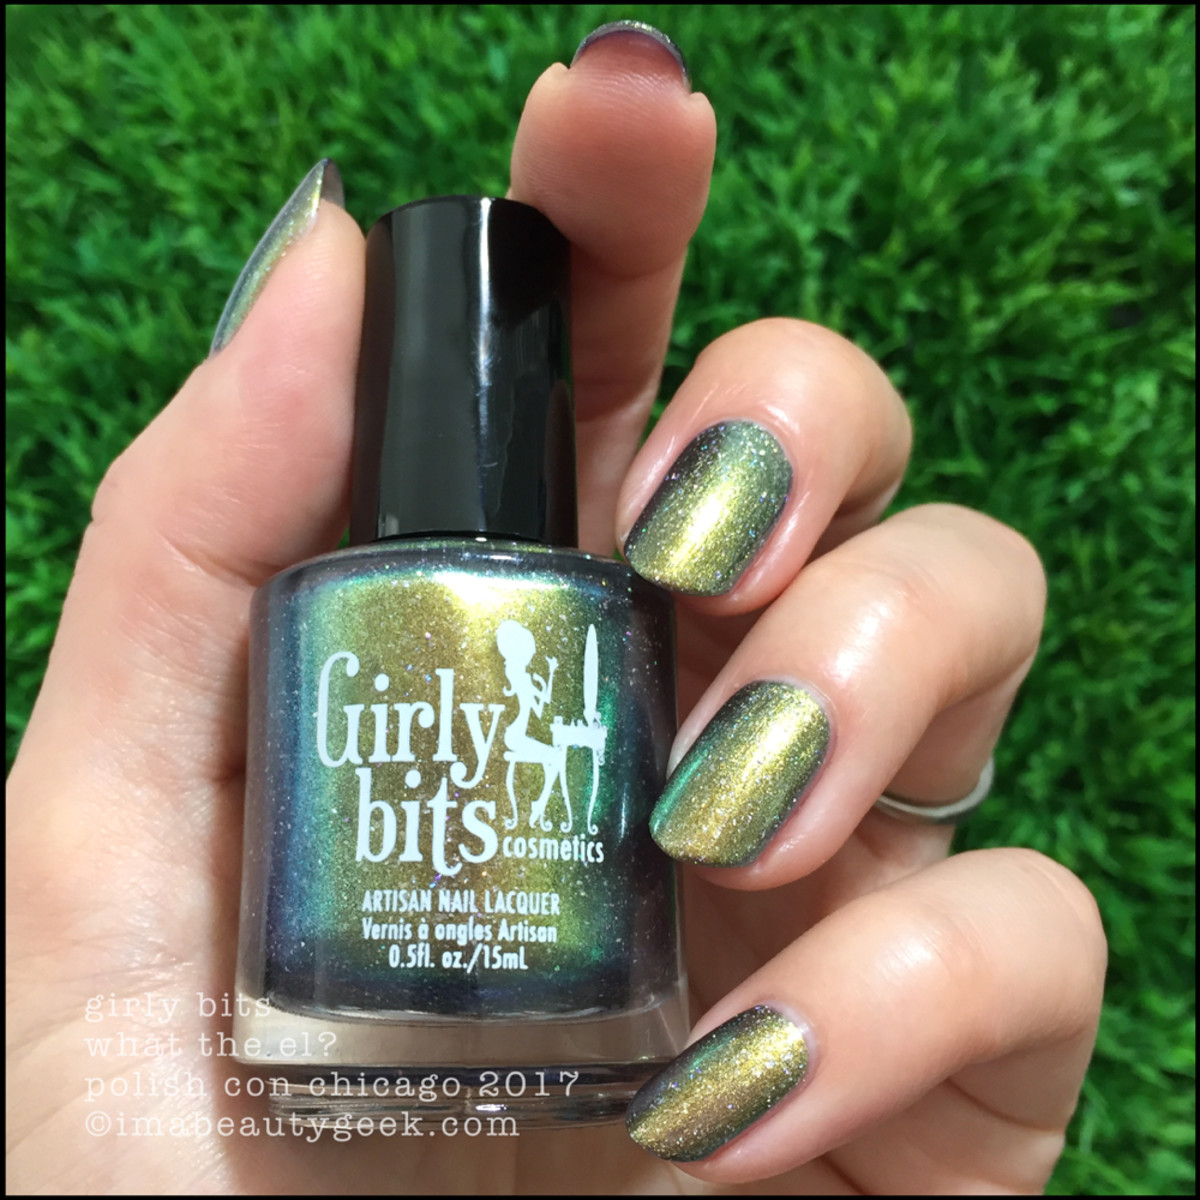 Girly Bits What the El? 4 _ Girly Bits Polish Con Chicago 2017